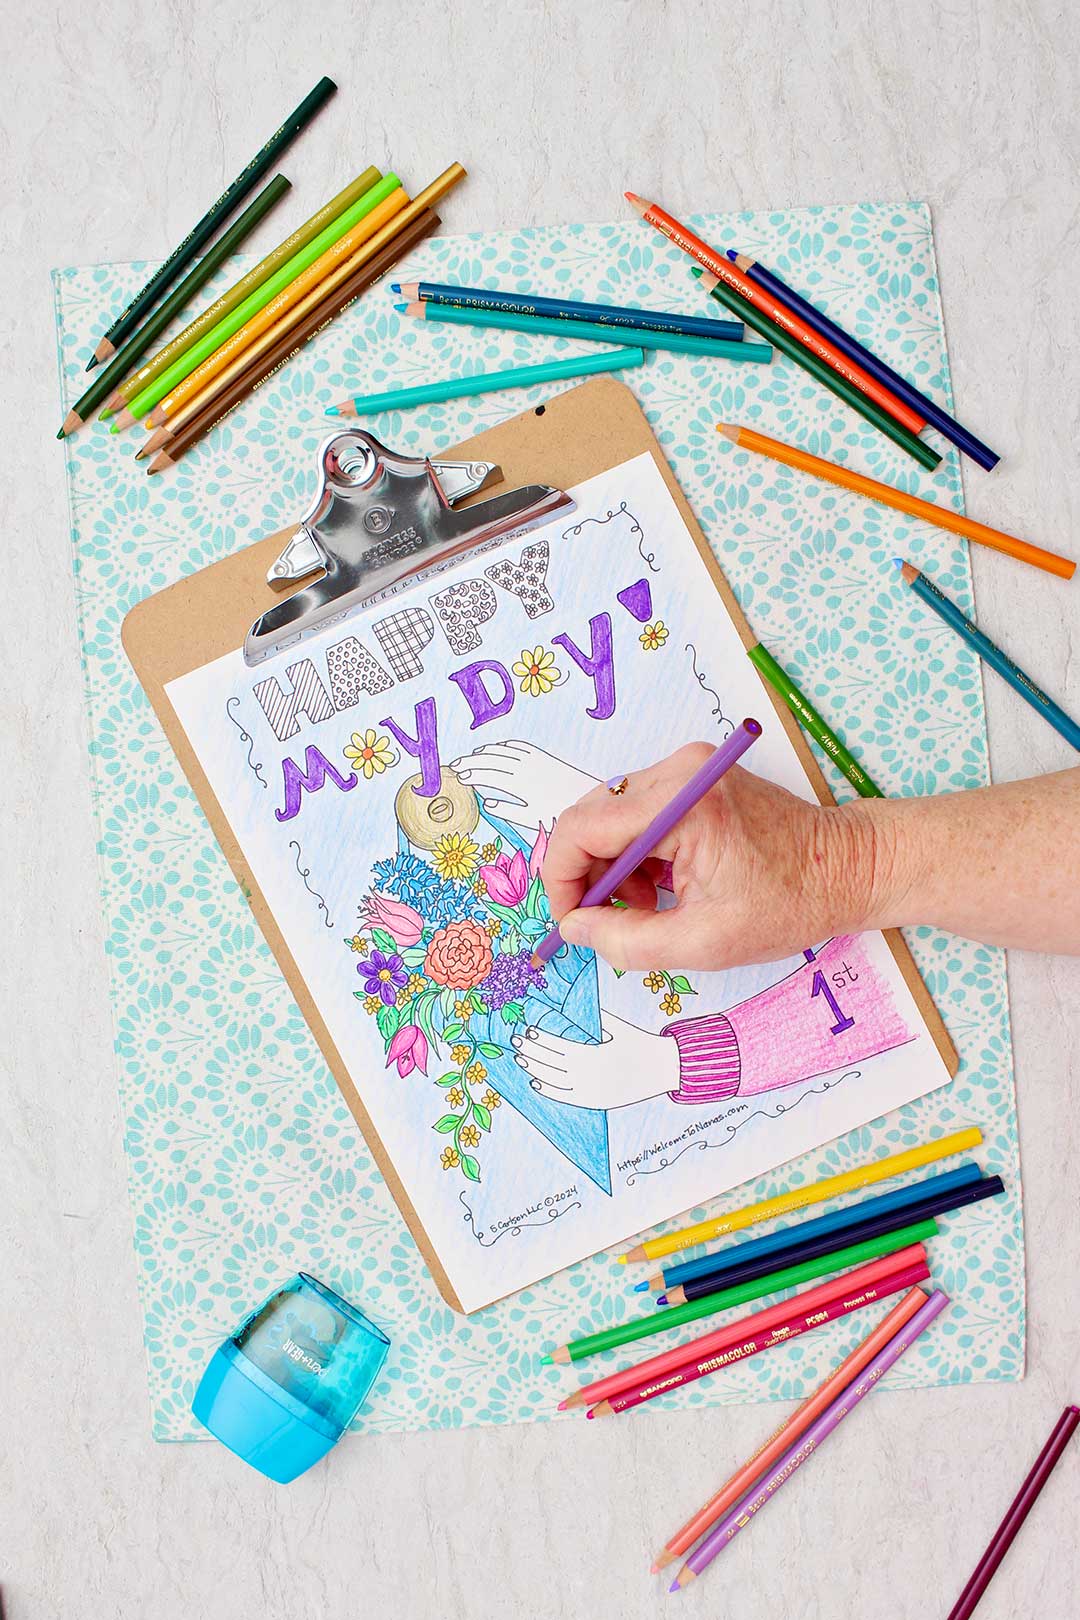 A May Day coloring page on a clip board being colored with coloring pencils